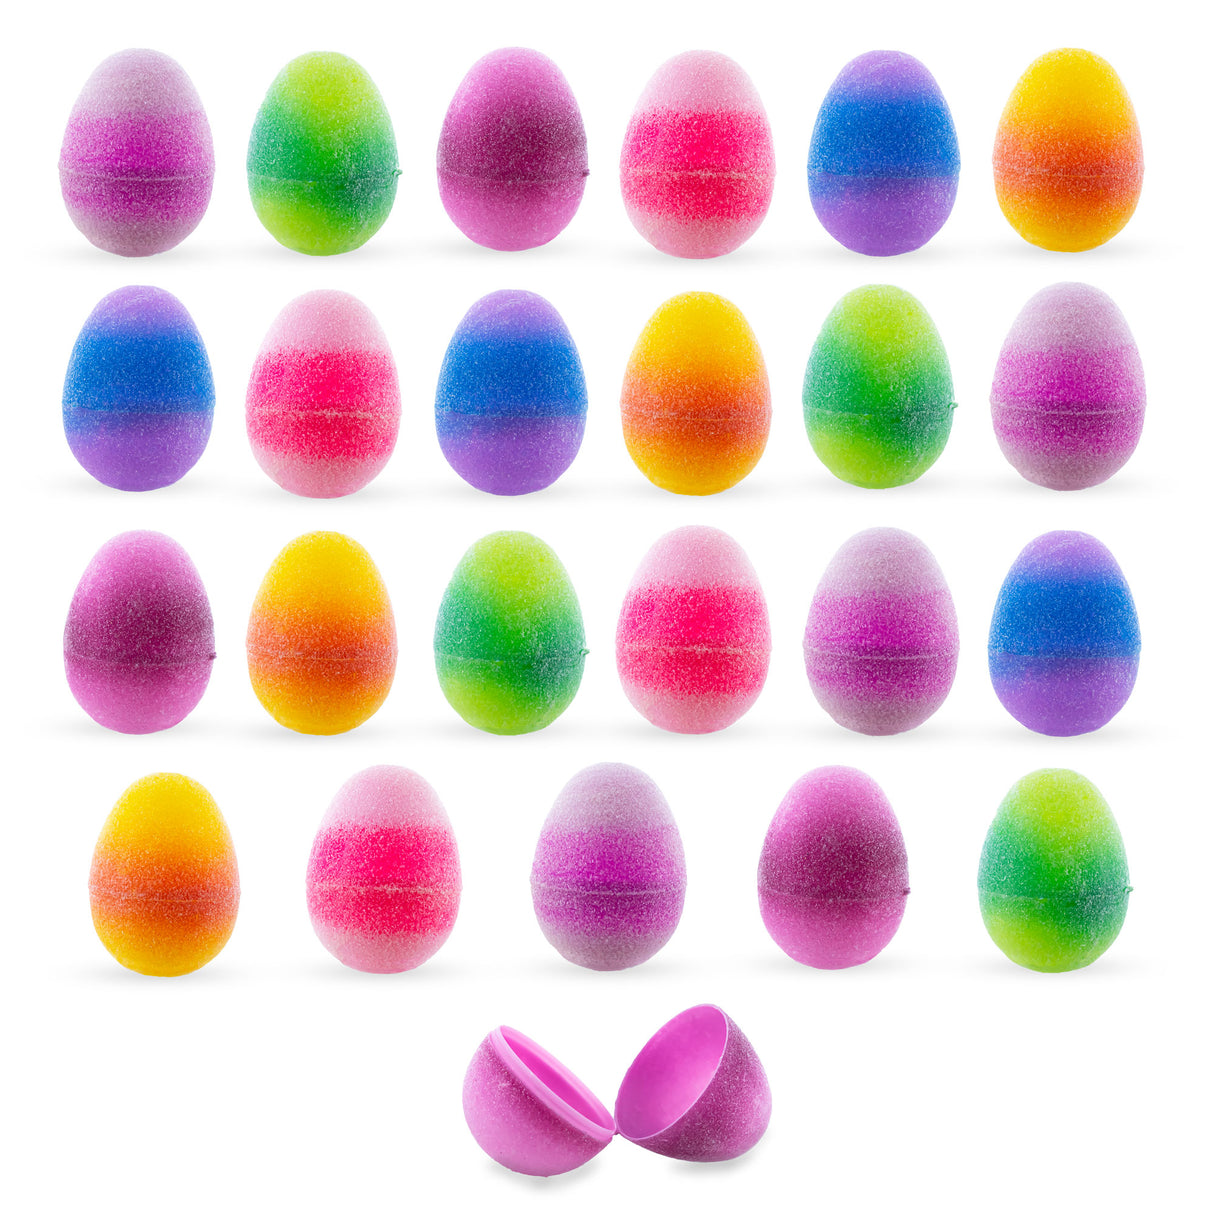 Plastic Sparkling Delights: Set of 24 Glittered Jelly Fruit Marmalade Plastic Easter Eggs, 2.25 Inches Each in Multi color Oval